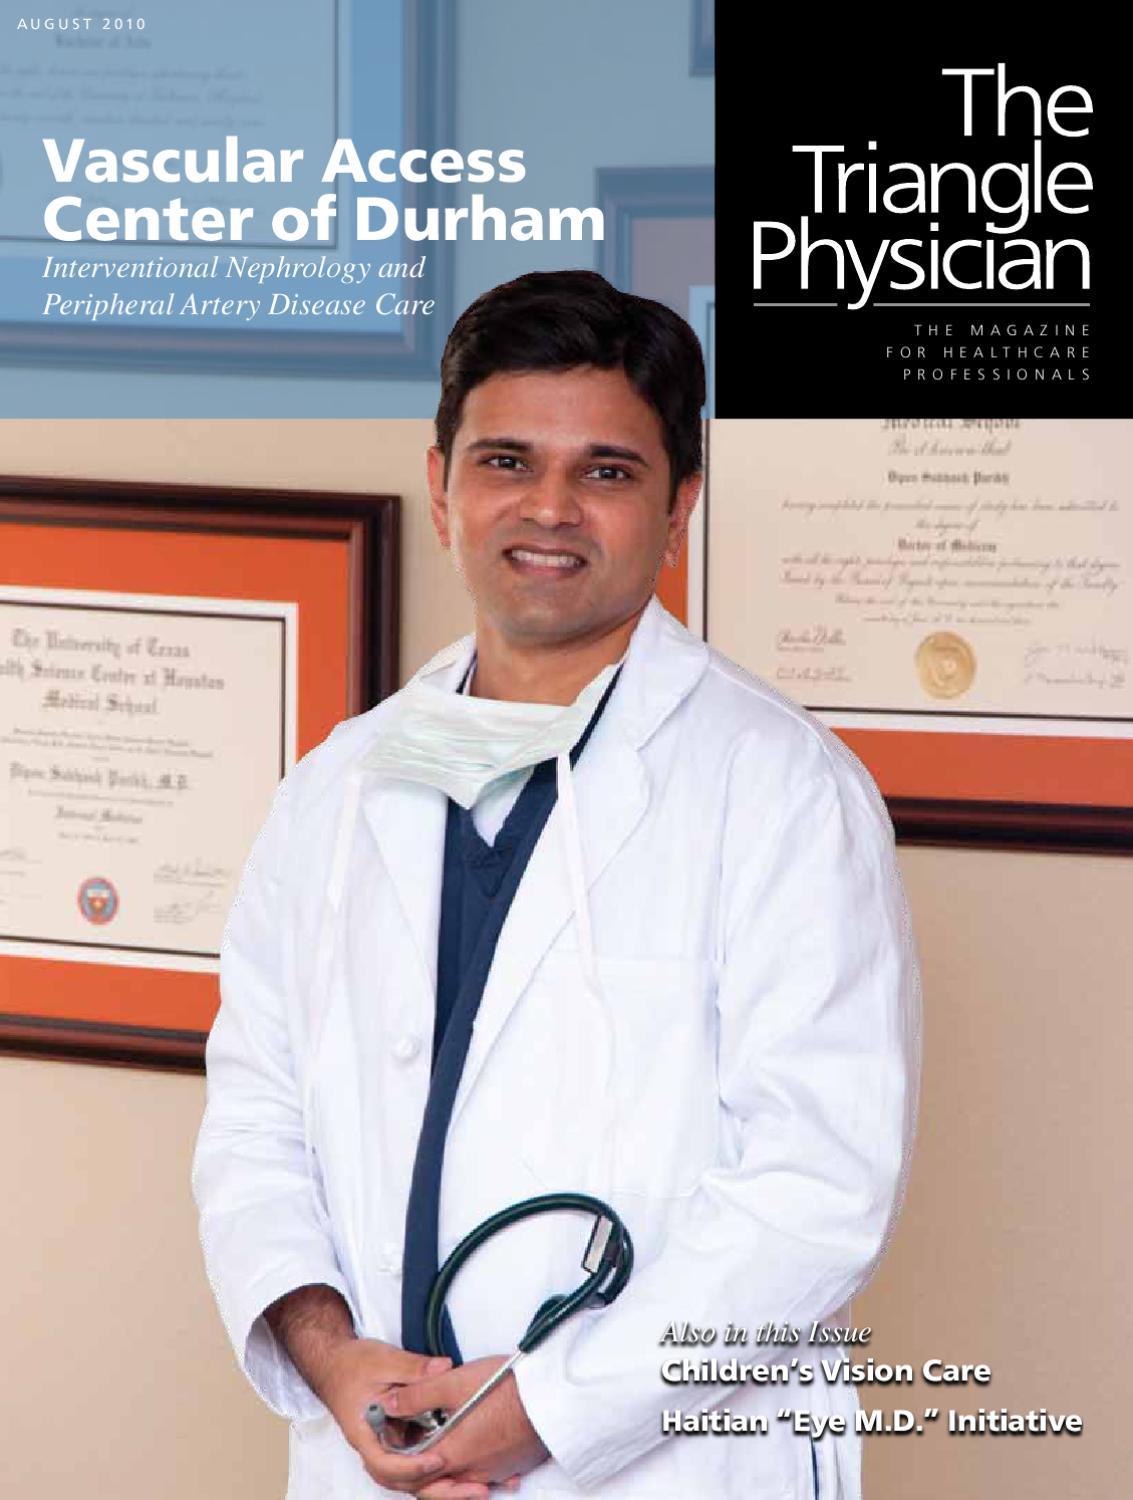 Eye Triangle Physiciqns Logo - The Triangle Physician August 2010